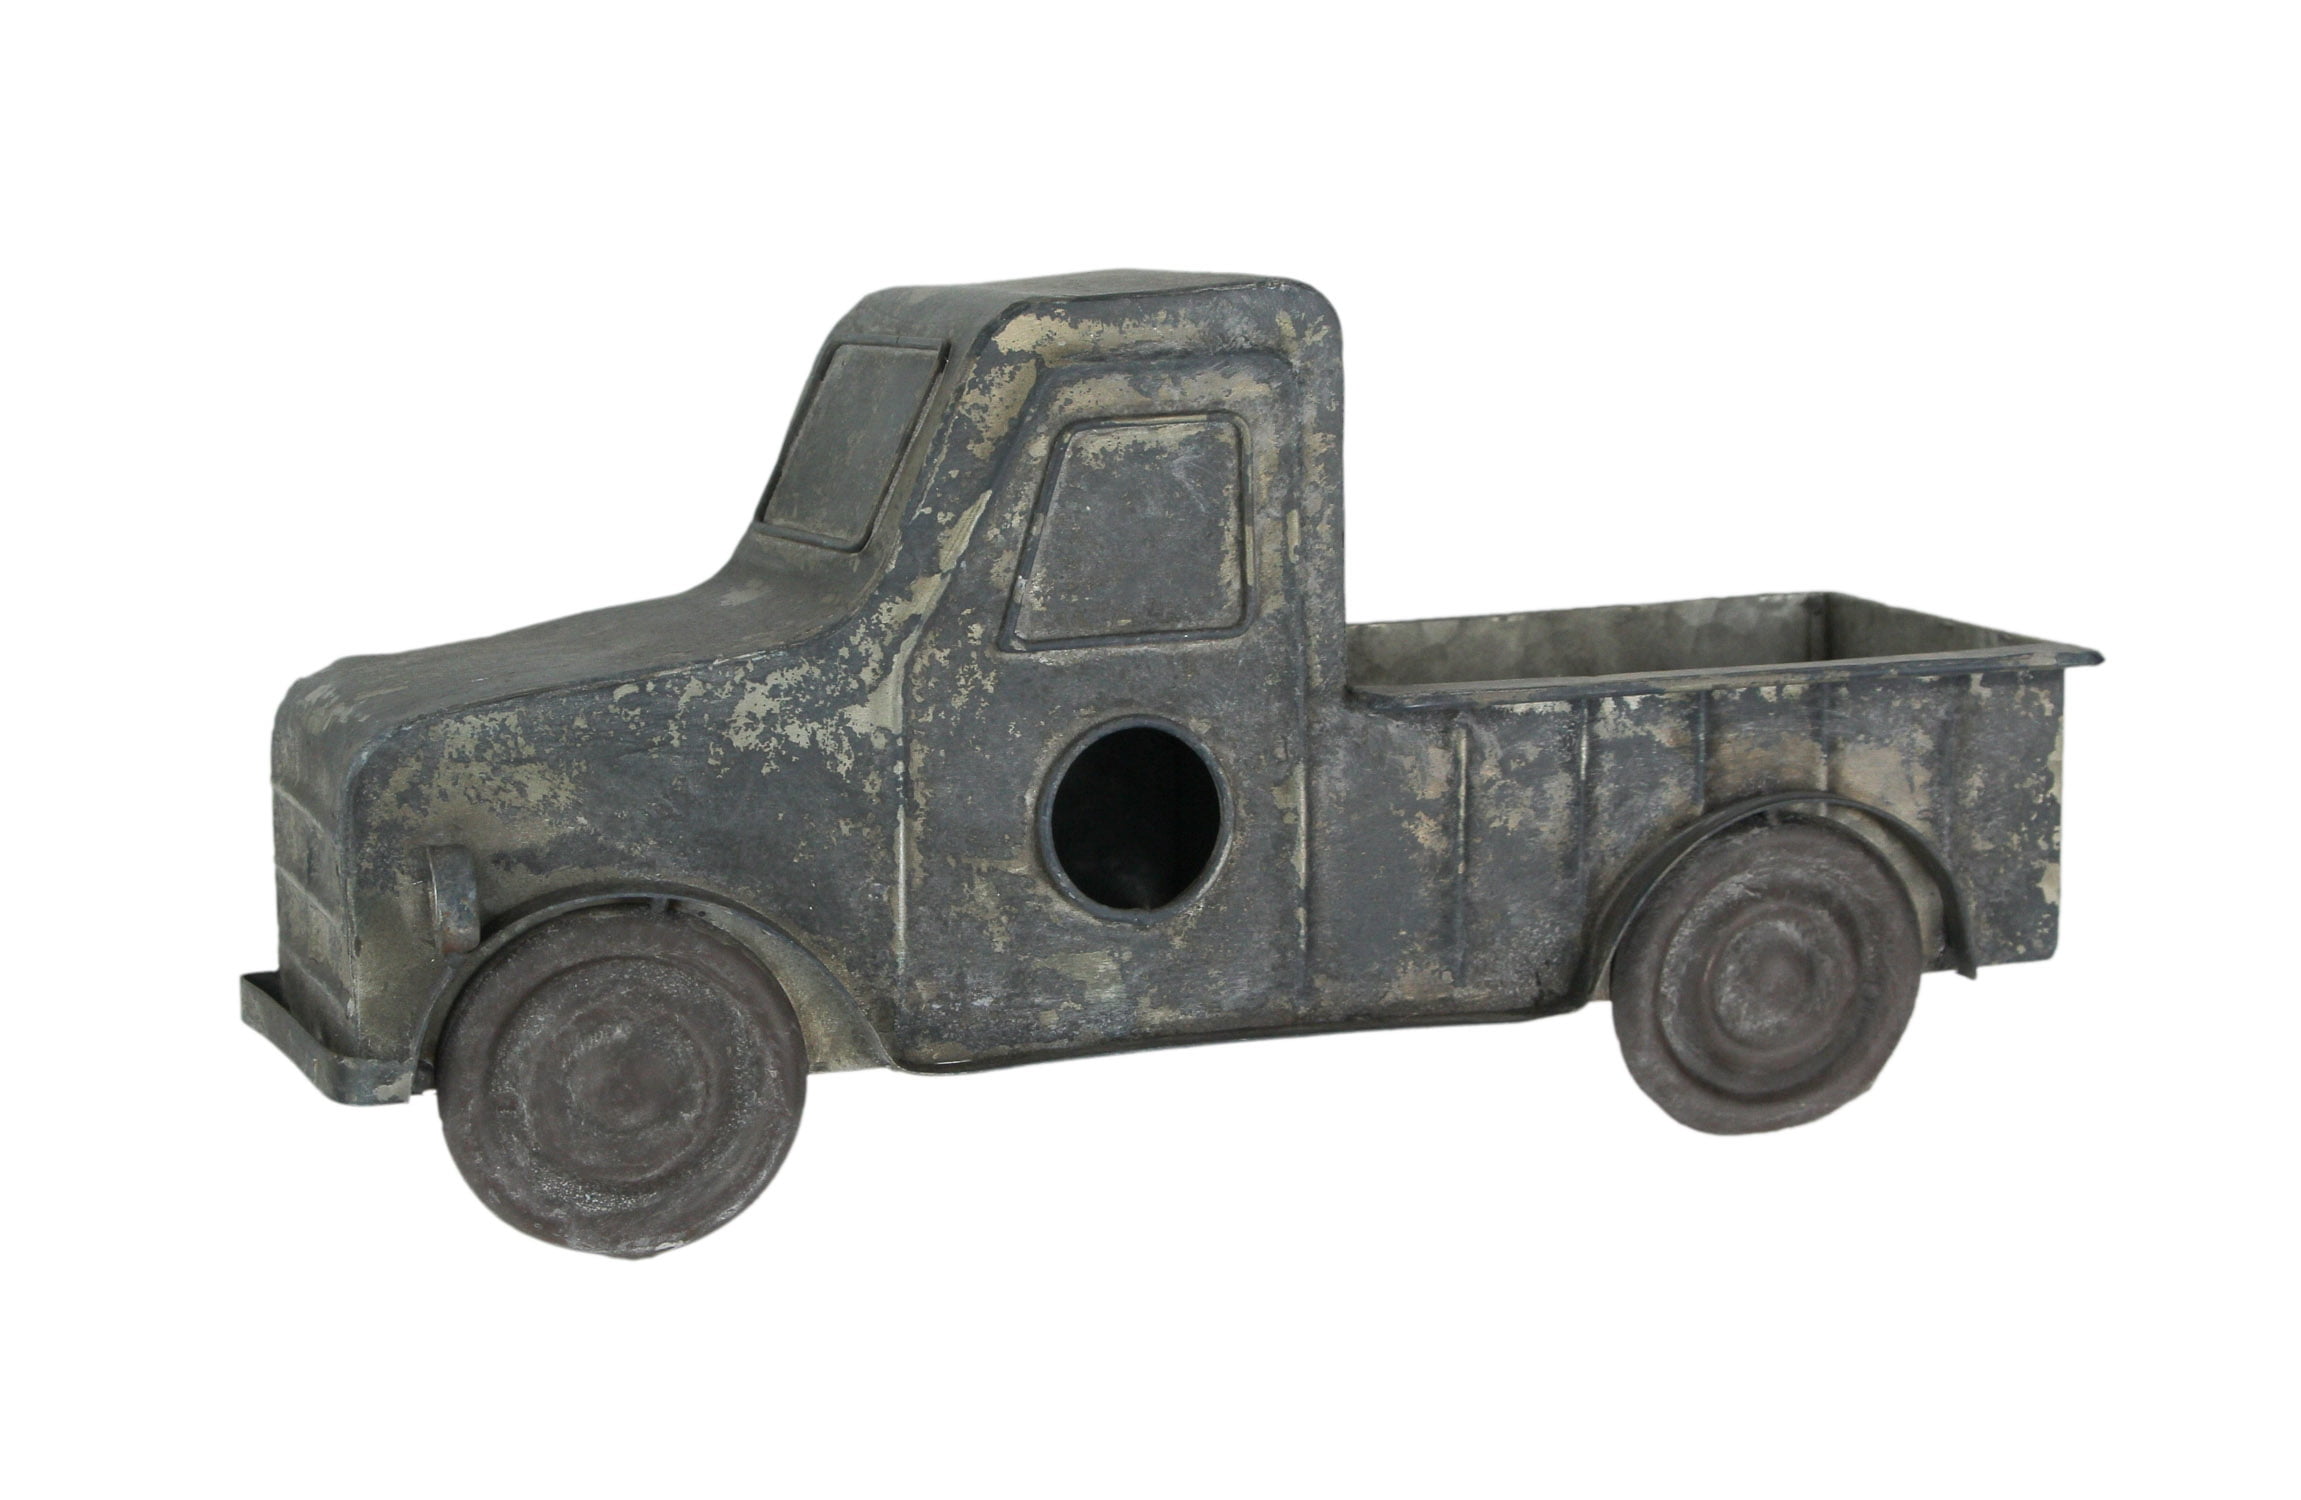 Details about   Solar Pickup TRUCK Farmhouse Rustic Decor Vintage Style Pickup Toy 